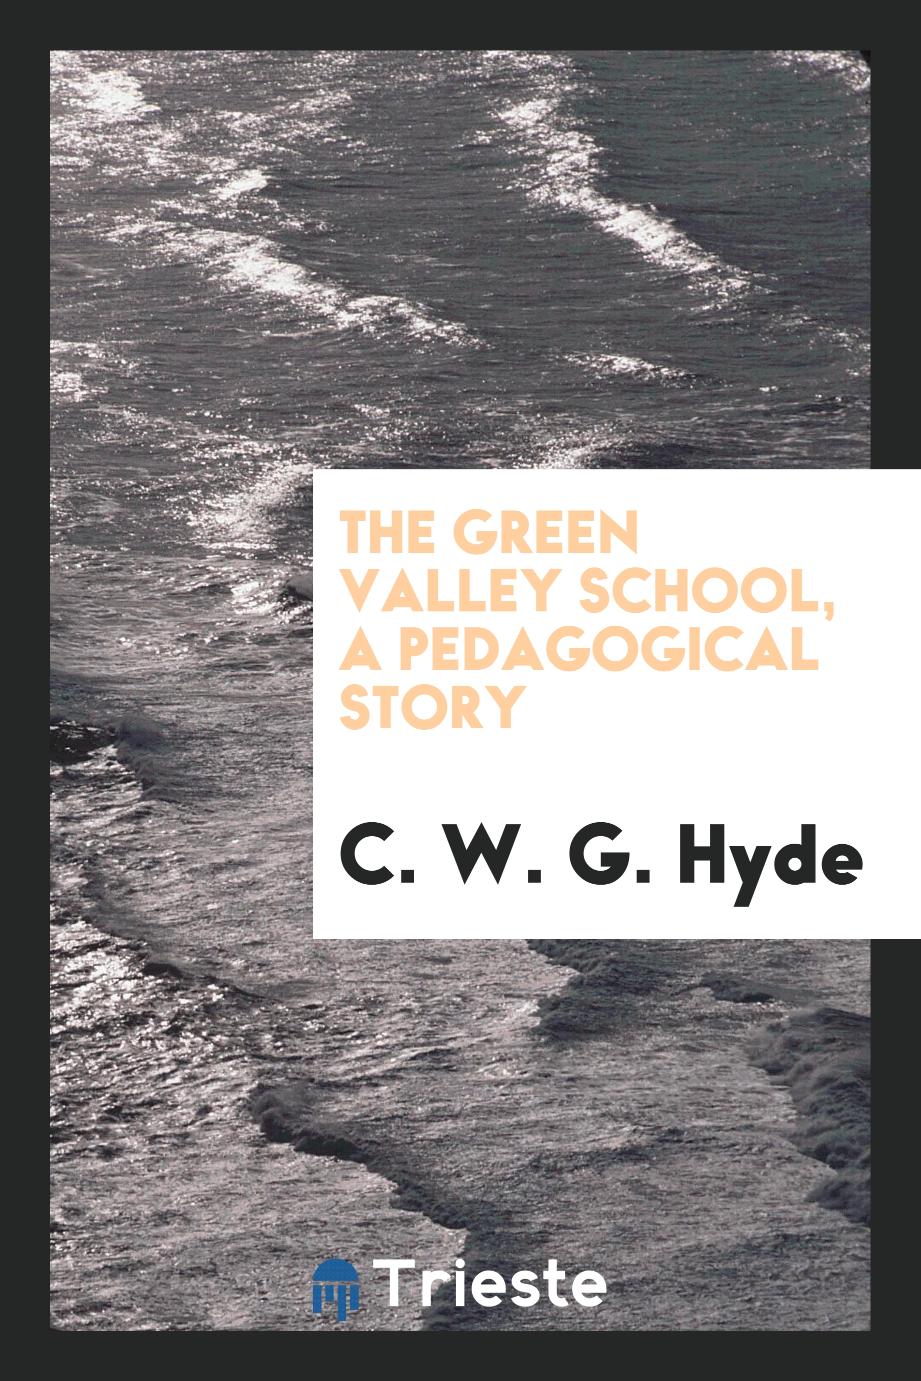 The Green Valley School, a Pedagogical Story